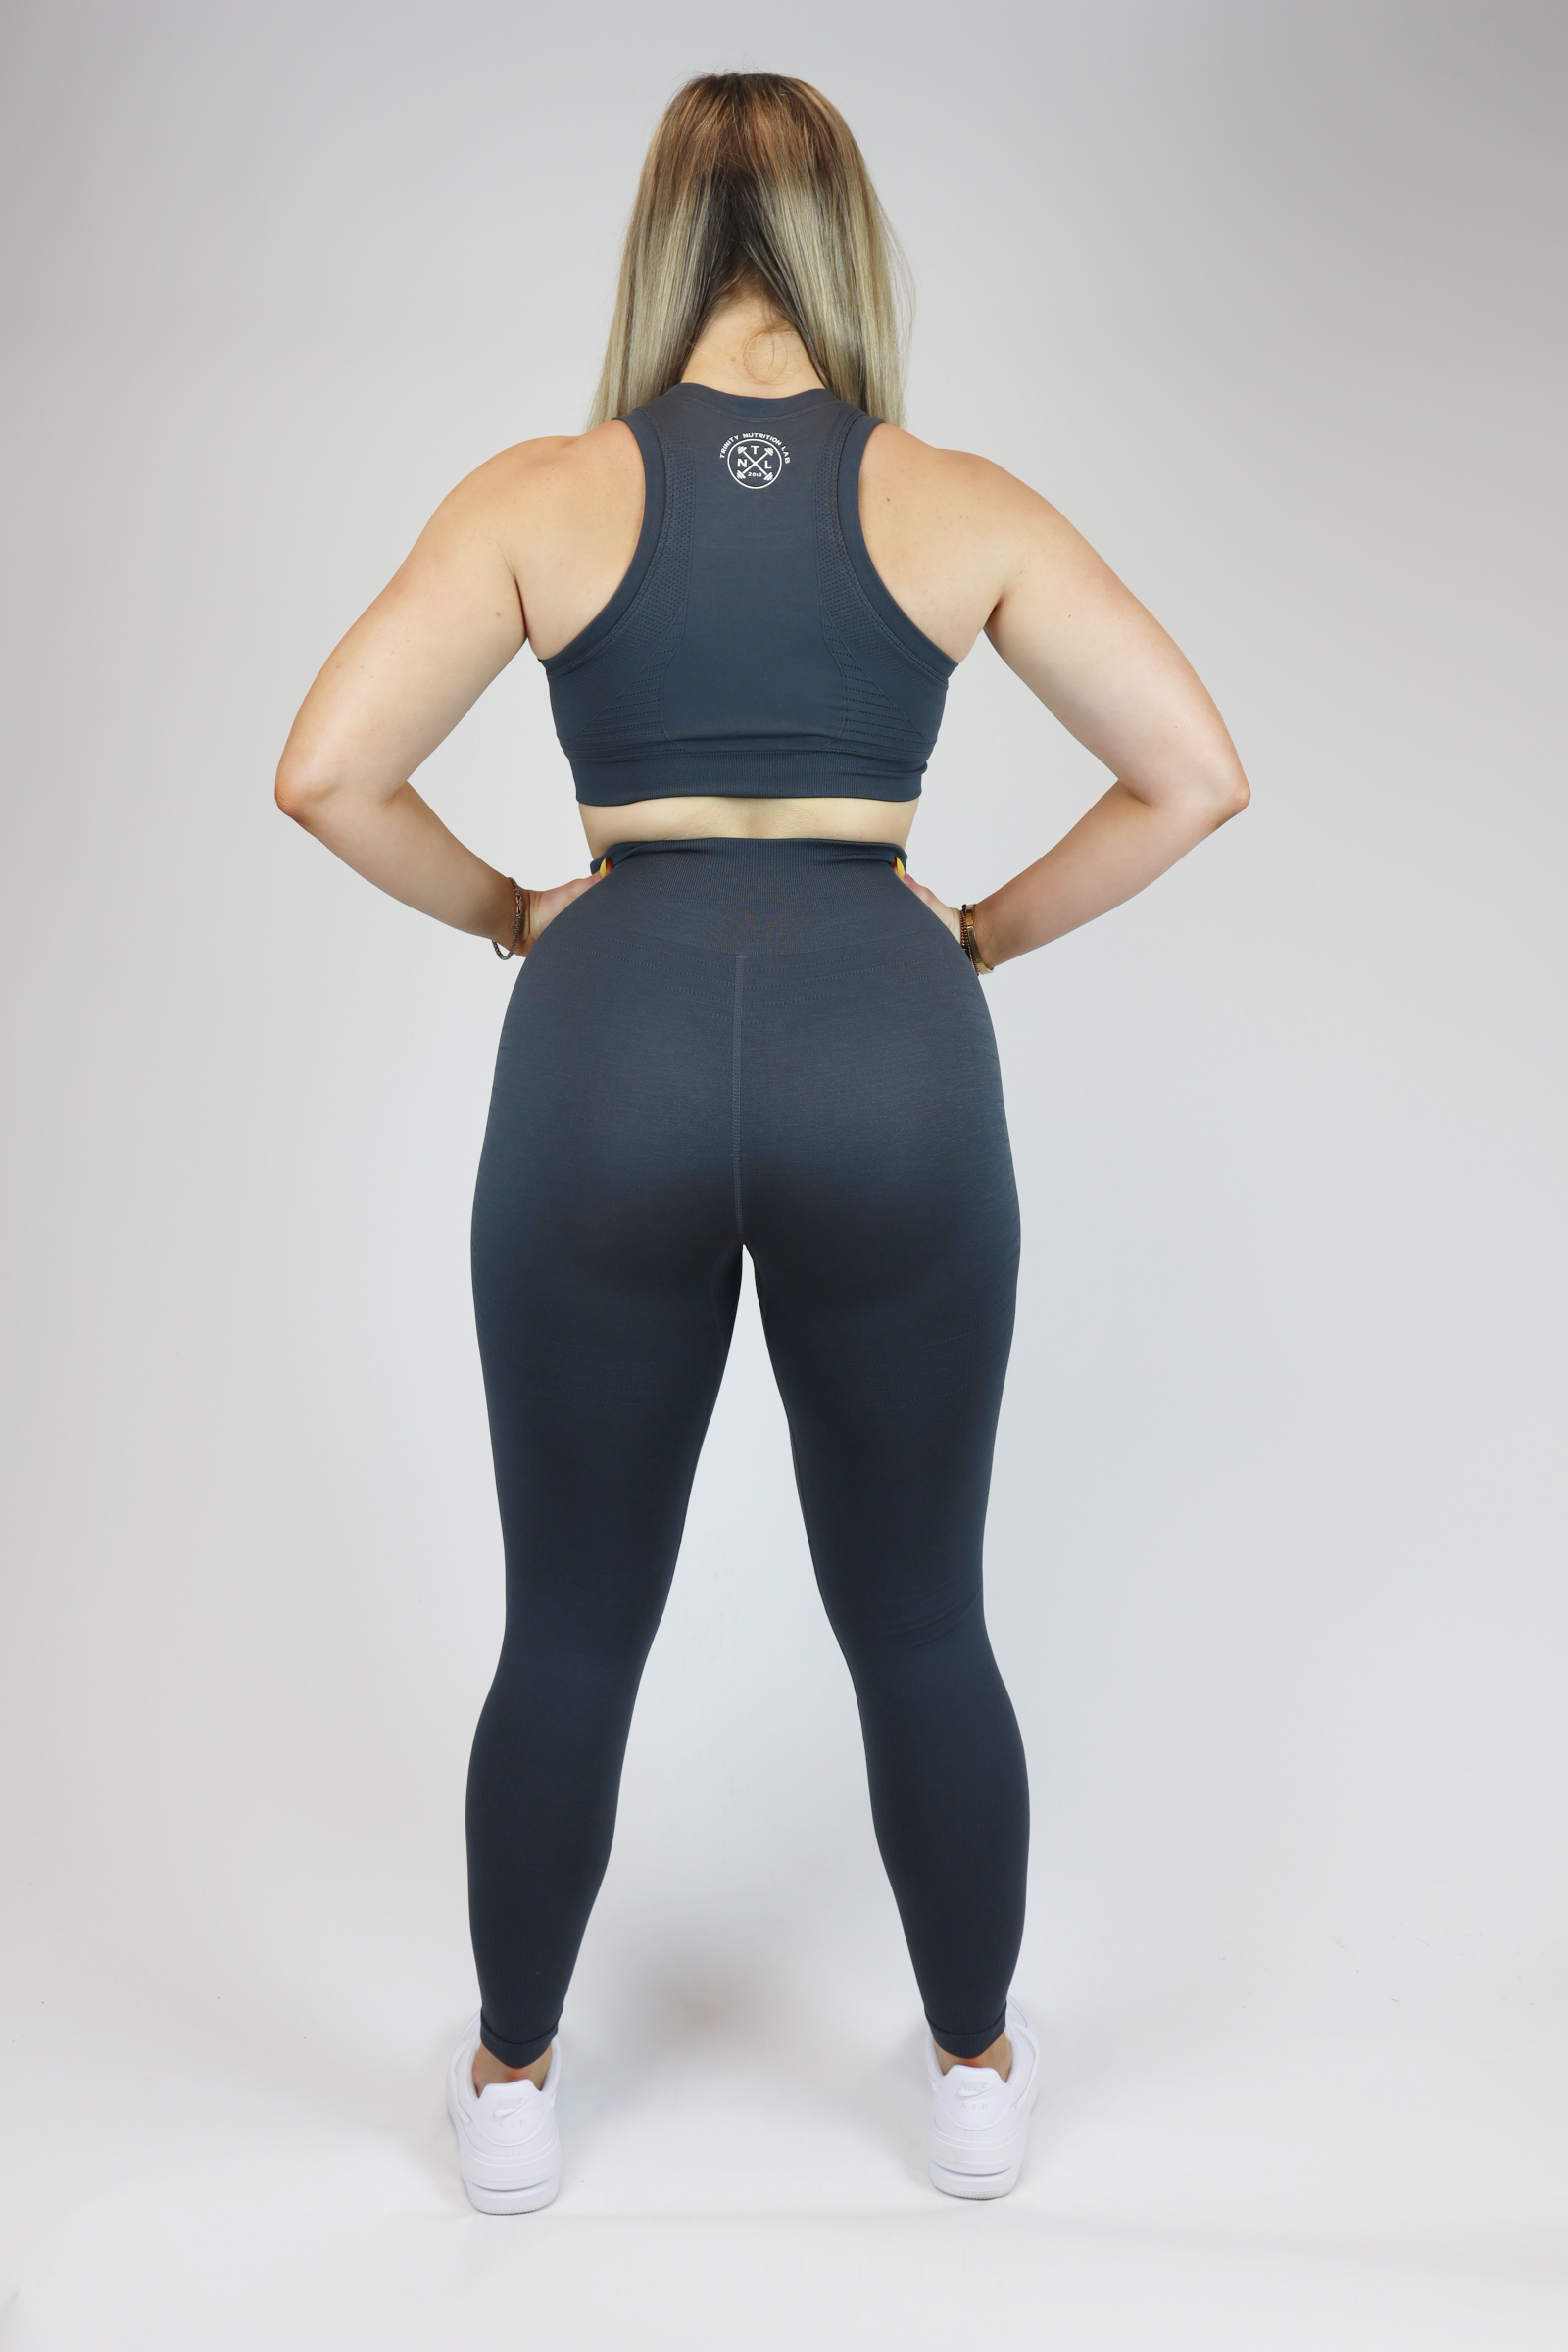 most comfortable leggings for a workout or hangout